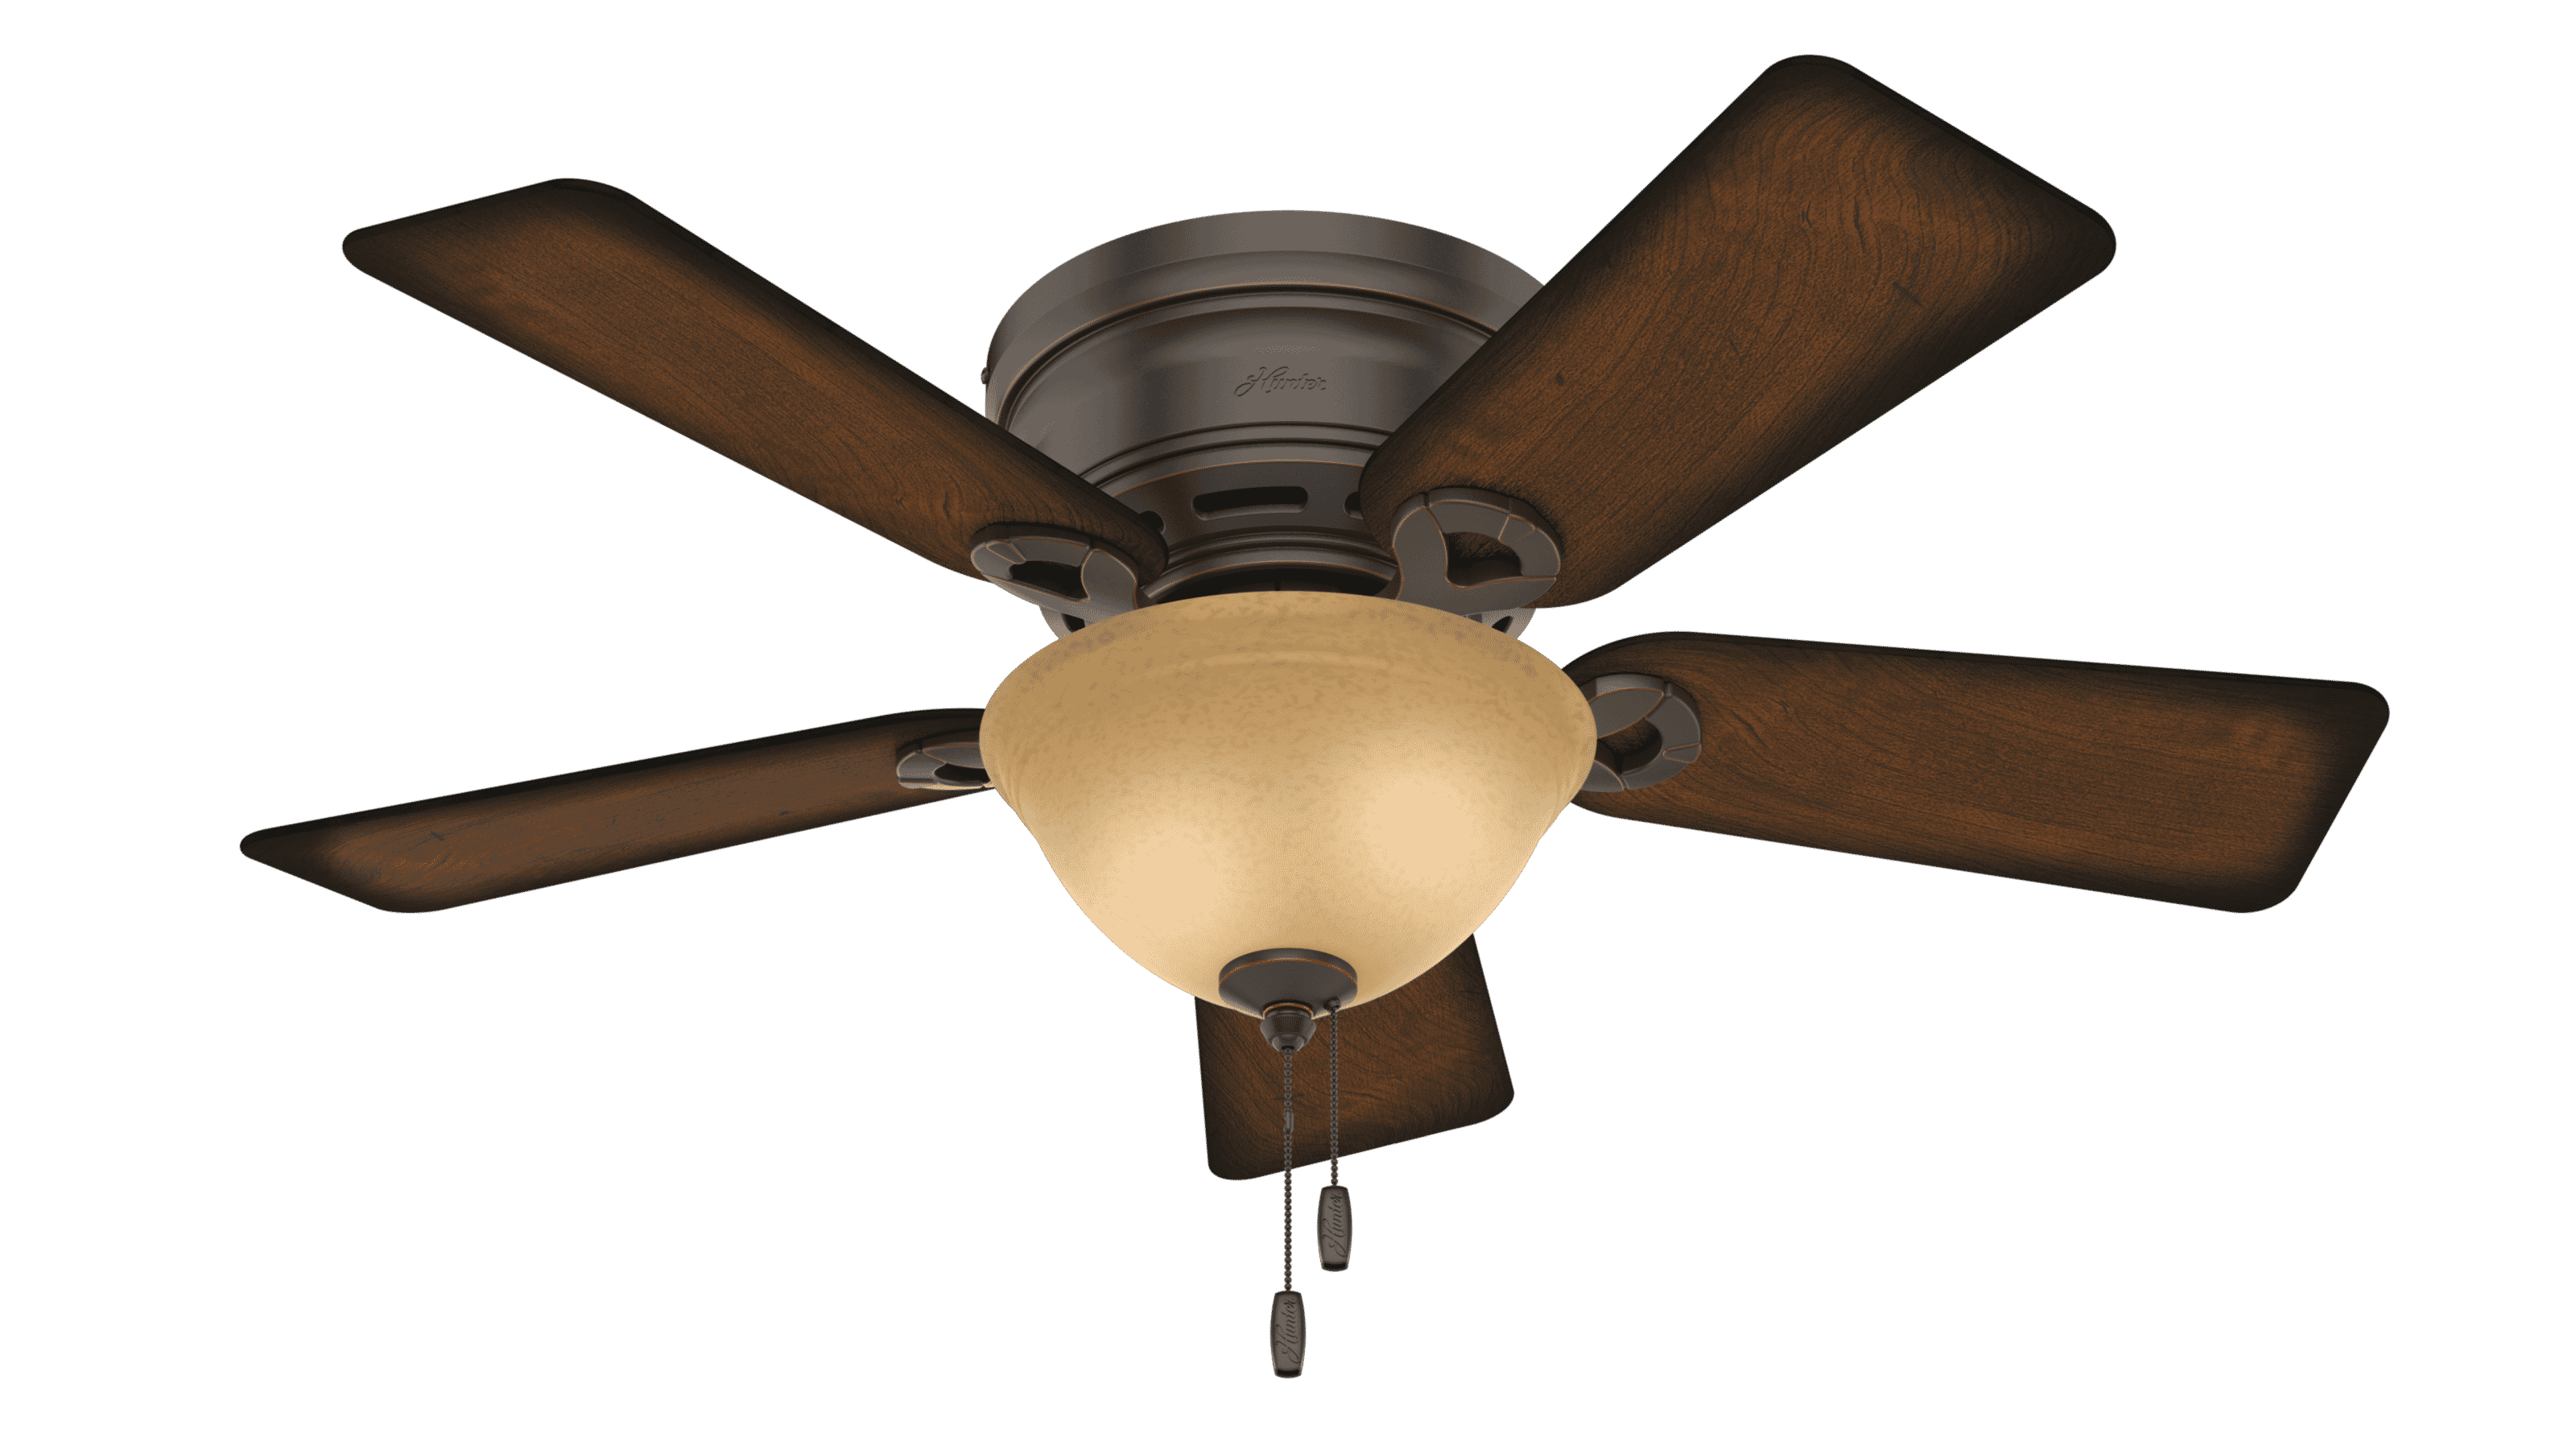 New Bronze for sale online Hunter 51061 42 inch Ceiling Fan with Pull Chain Control